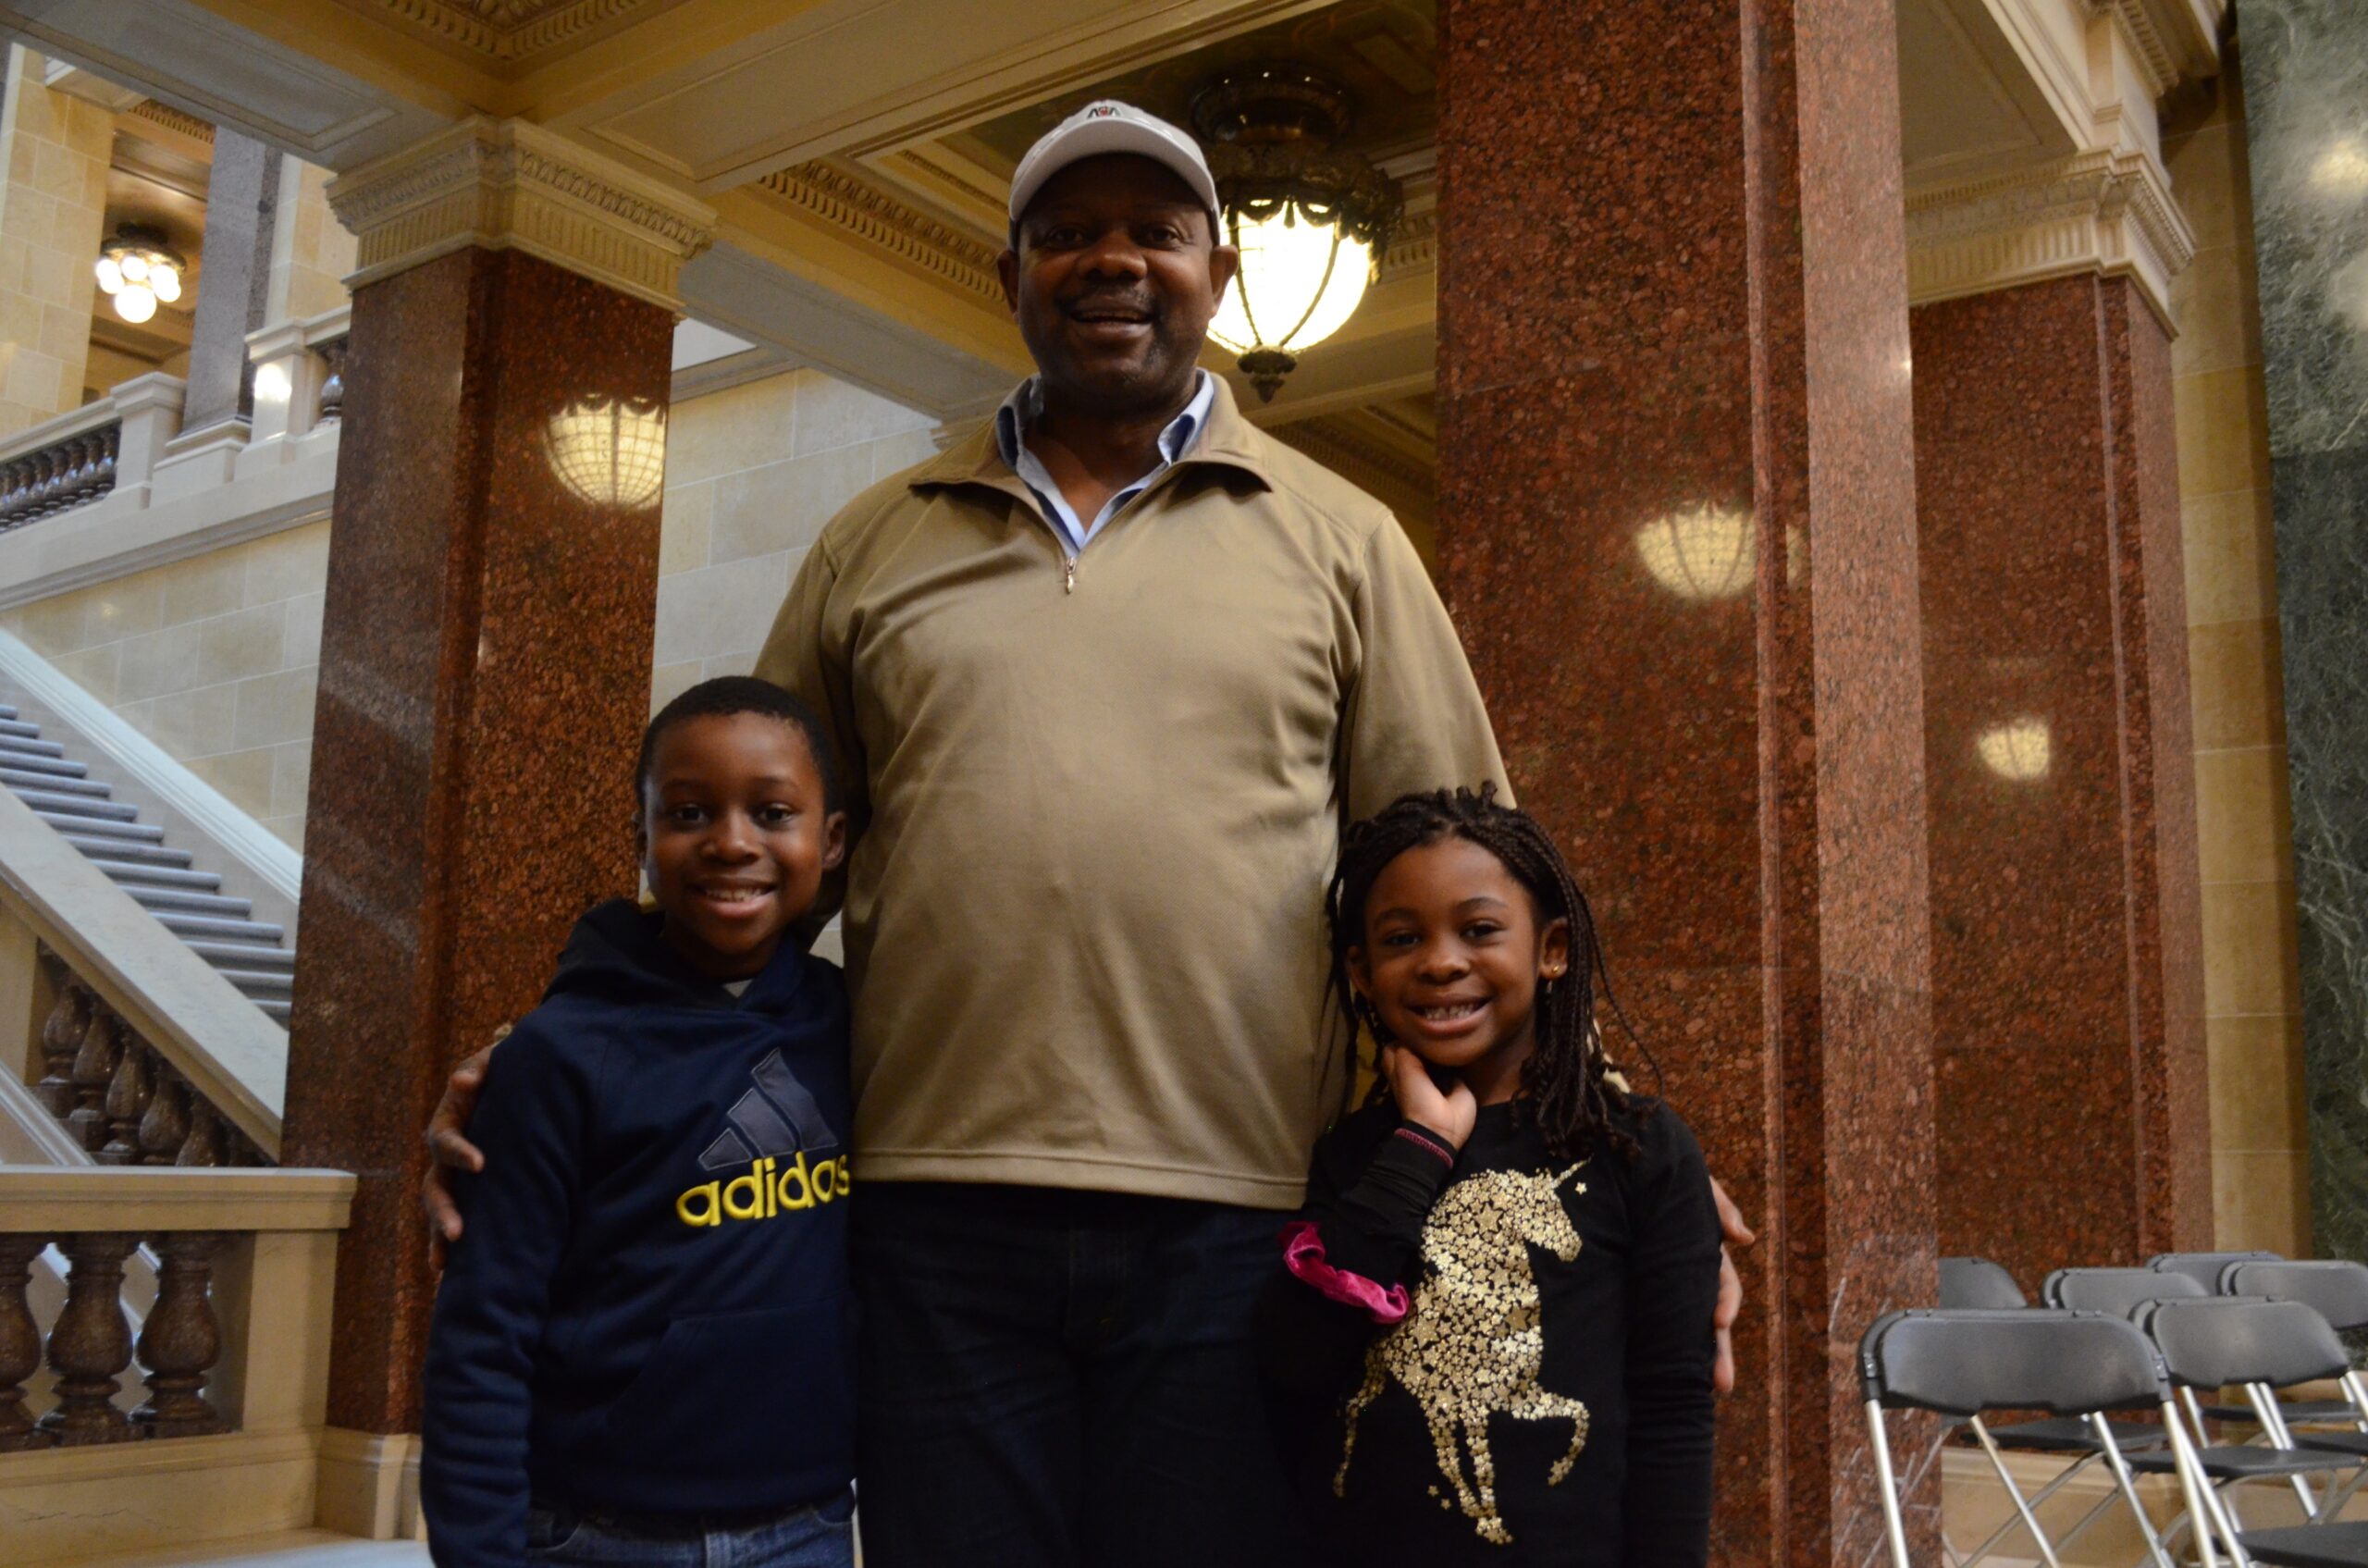 Jean-René Watchou stands with his children, Kenzo-Samuel, 8 years old, and Leá-Rosalie, 5-and-a-half years old.